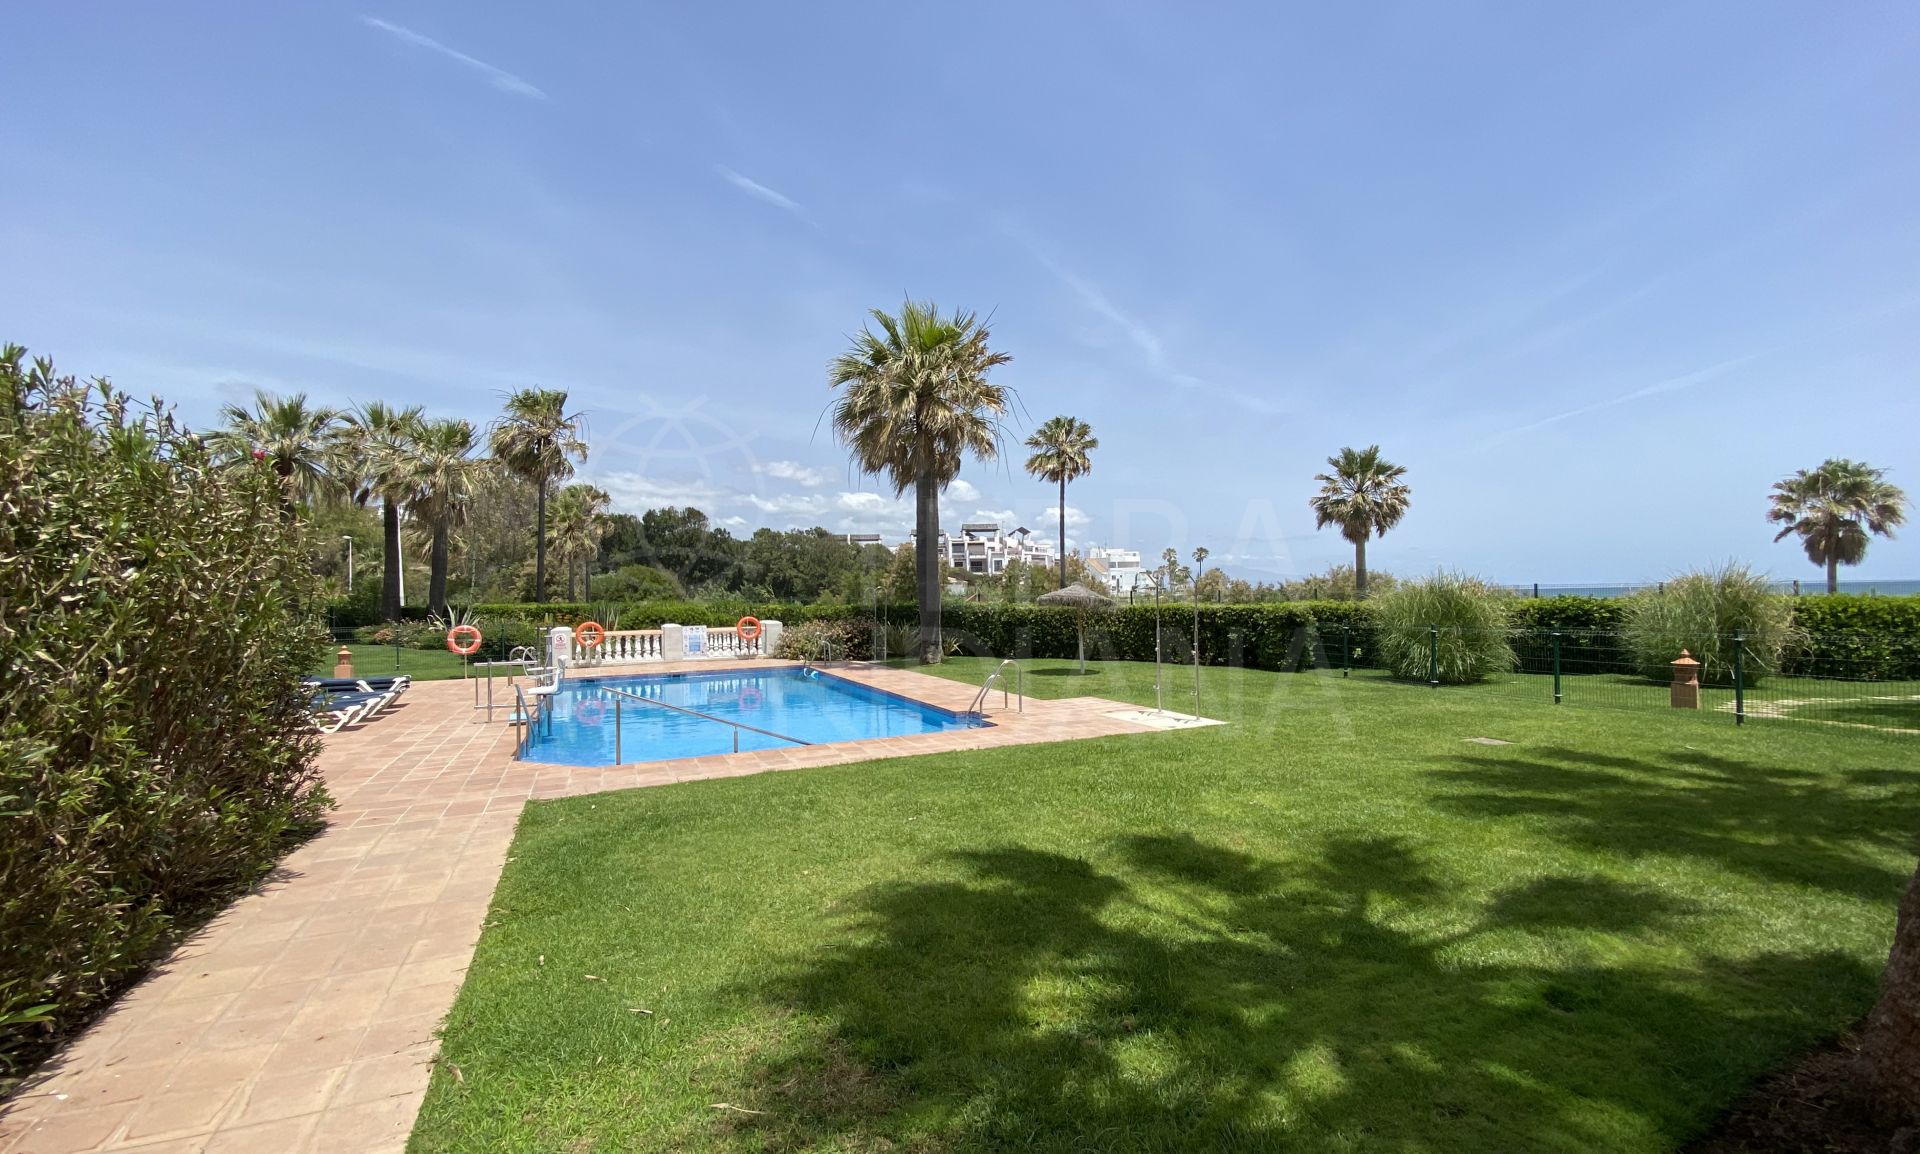 Superb 3 bed duplex penthouse in front-line beach community for sale in Casares costa